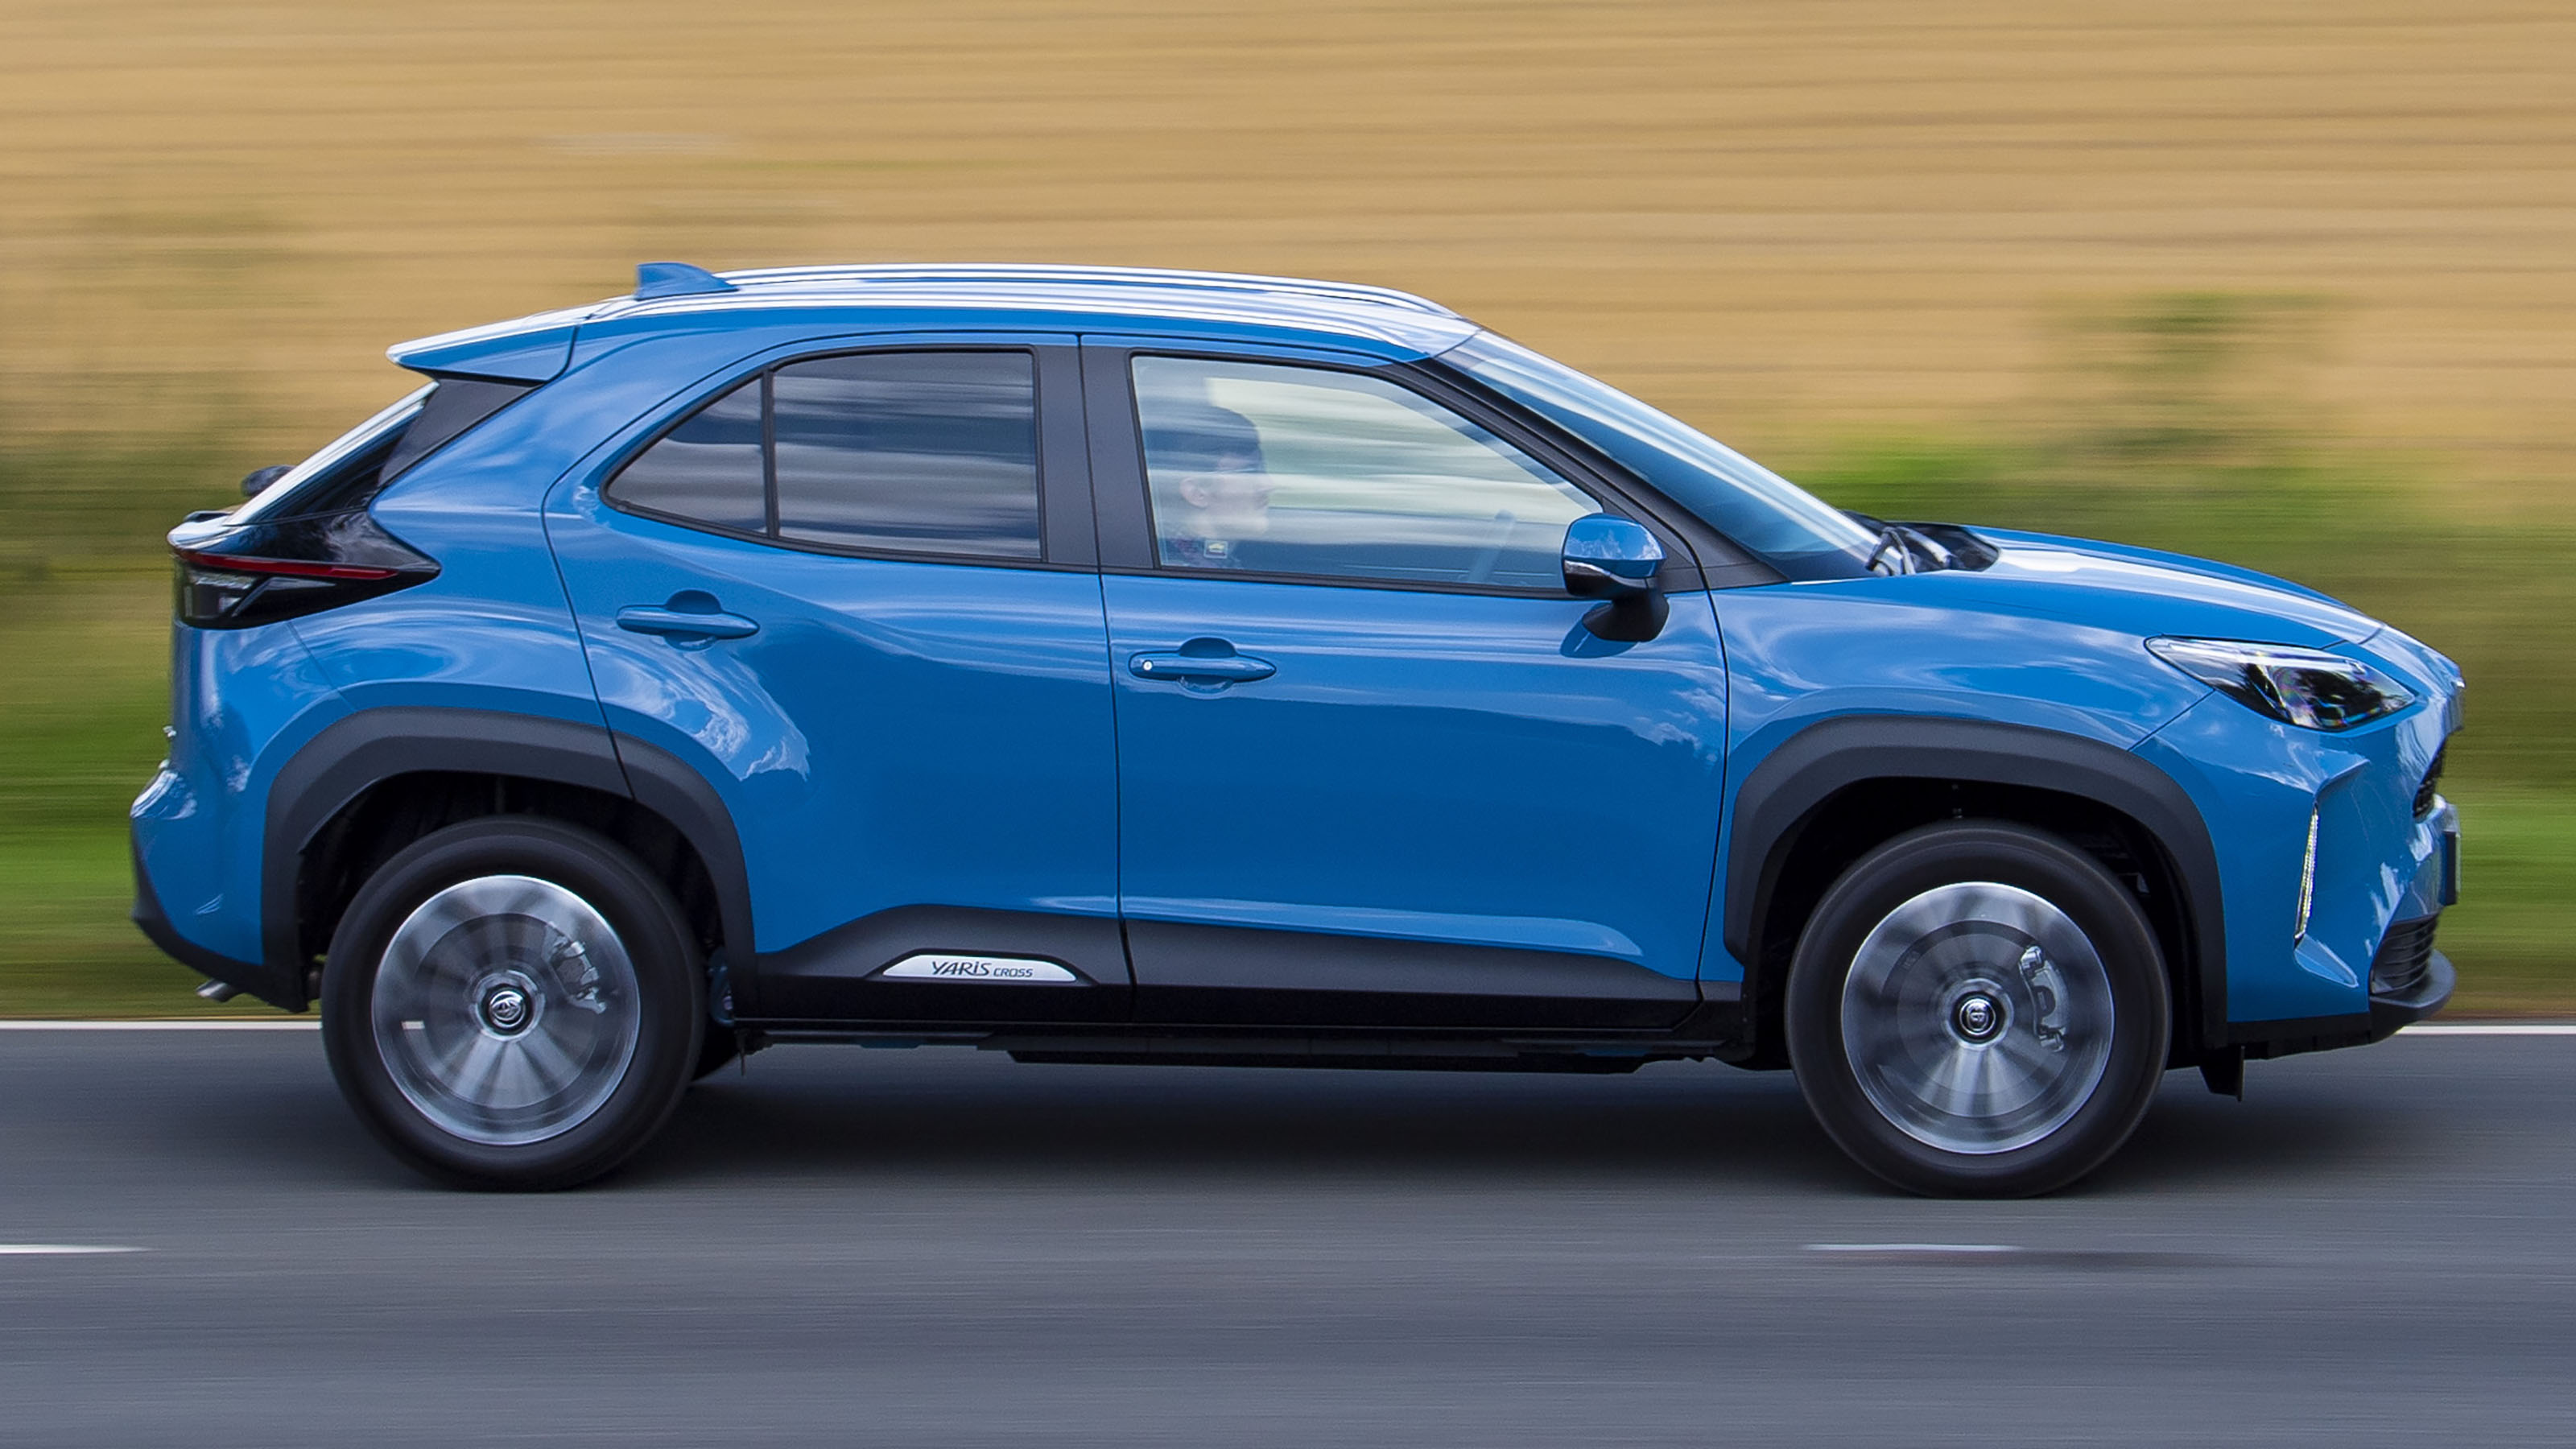 Toyota Yaris Cross is a hybrid subcompact crossover SUV produced